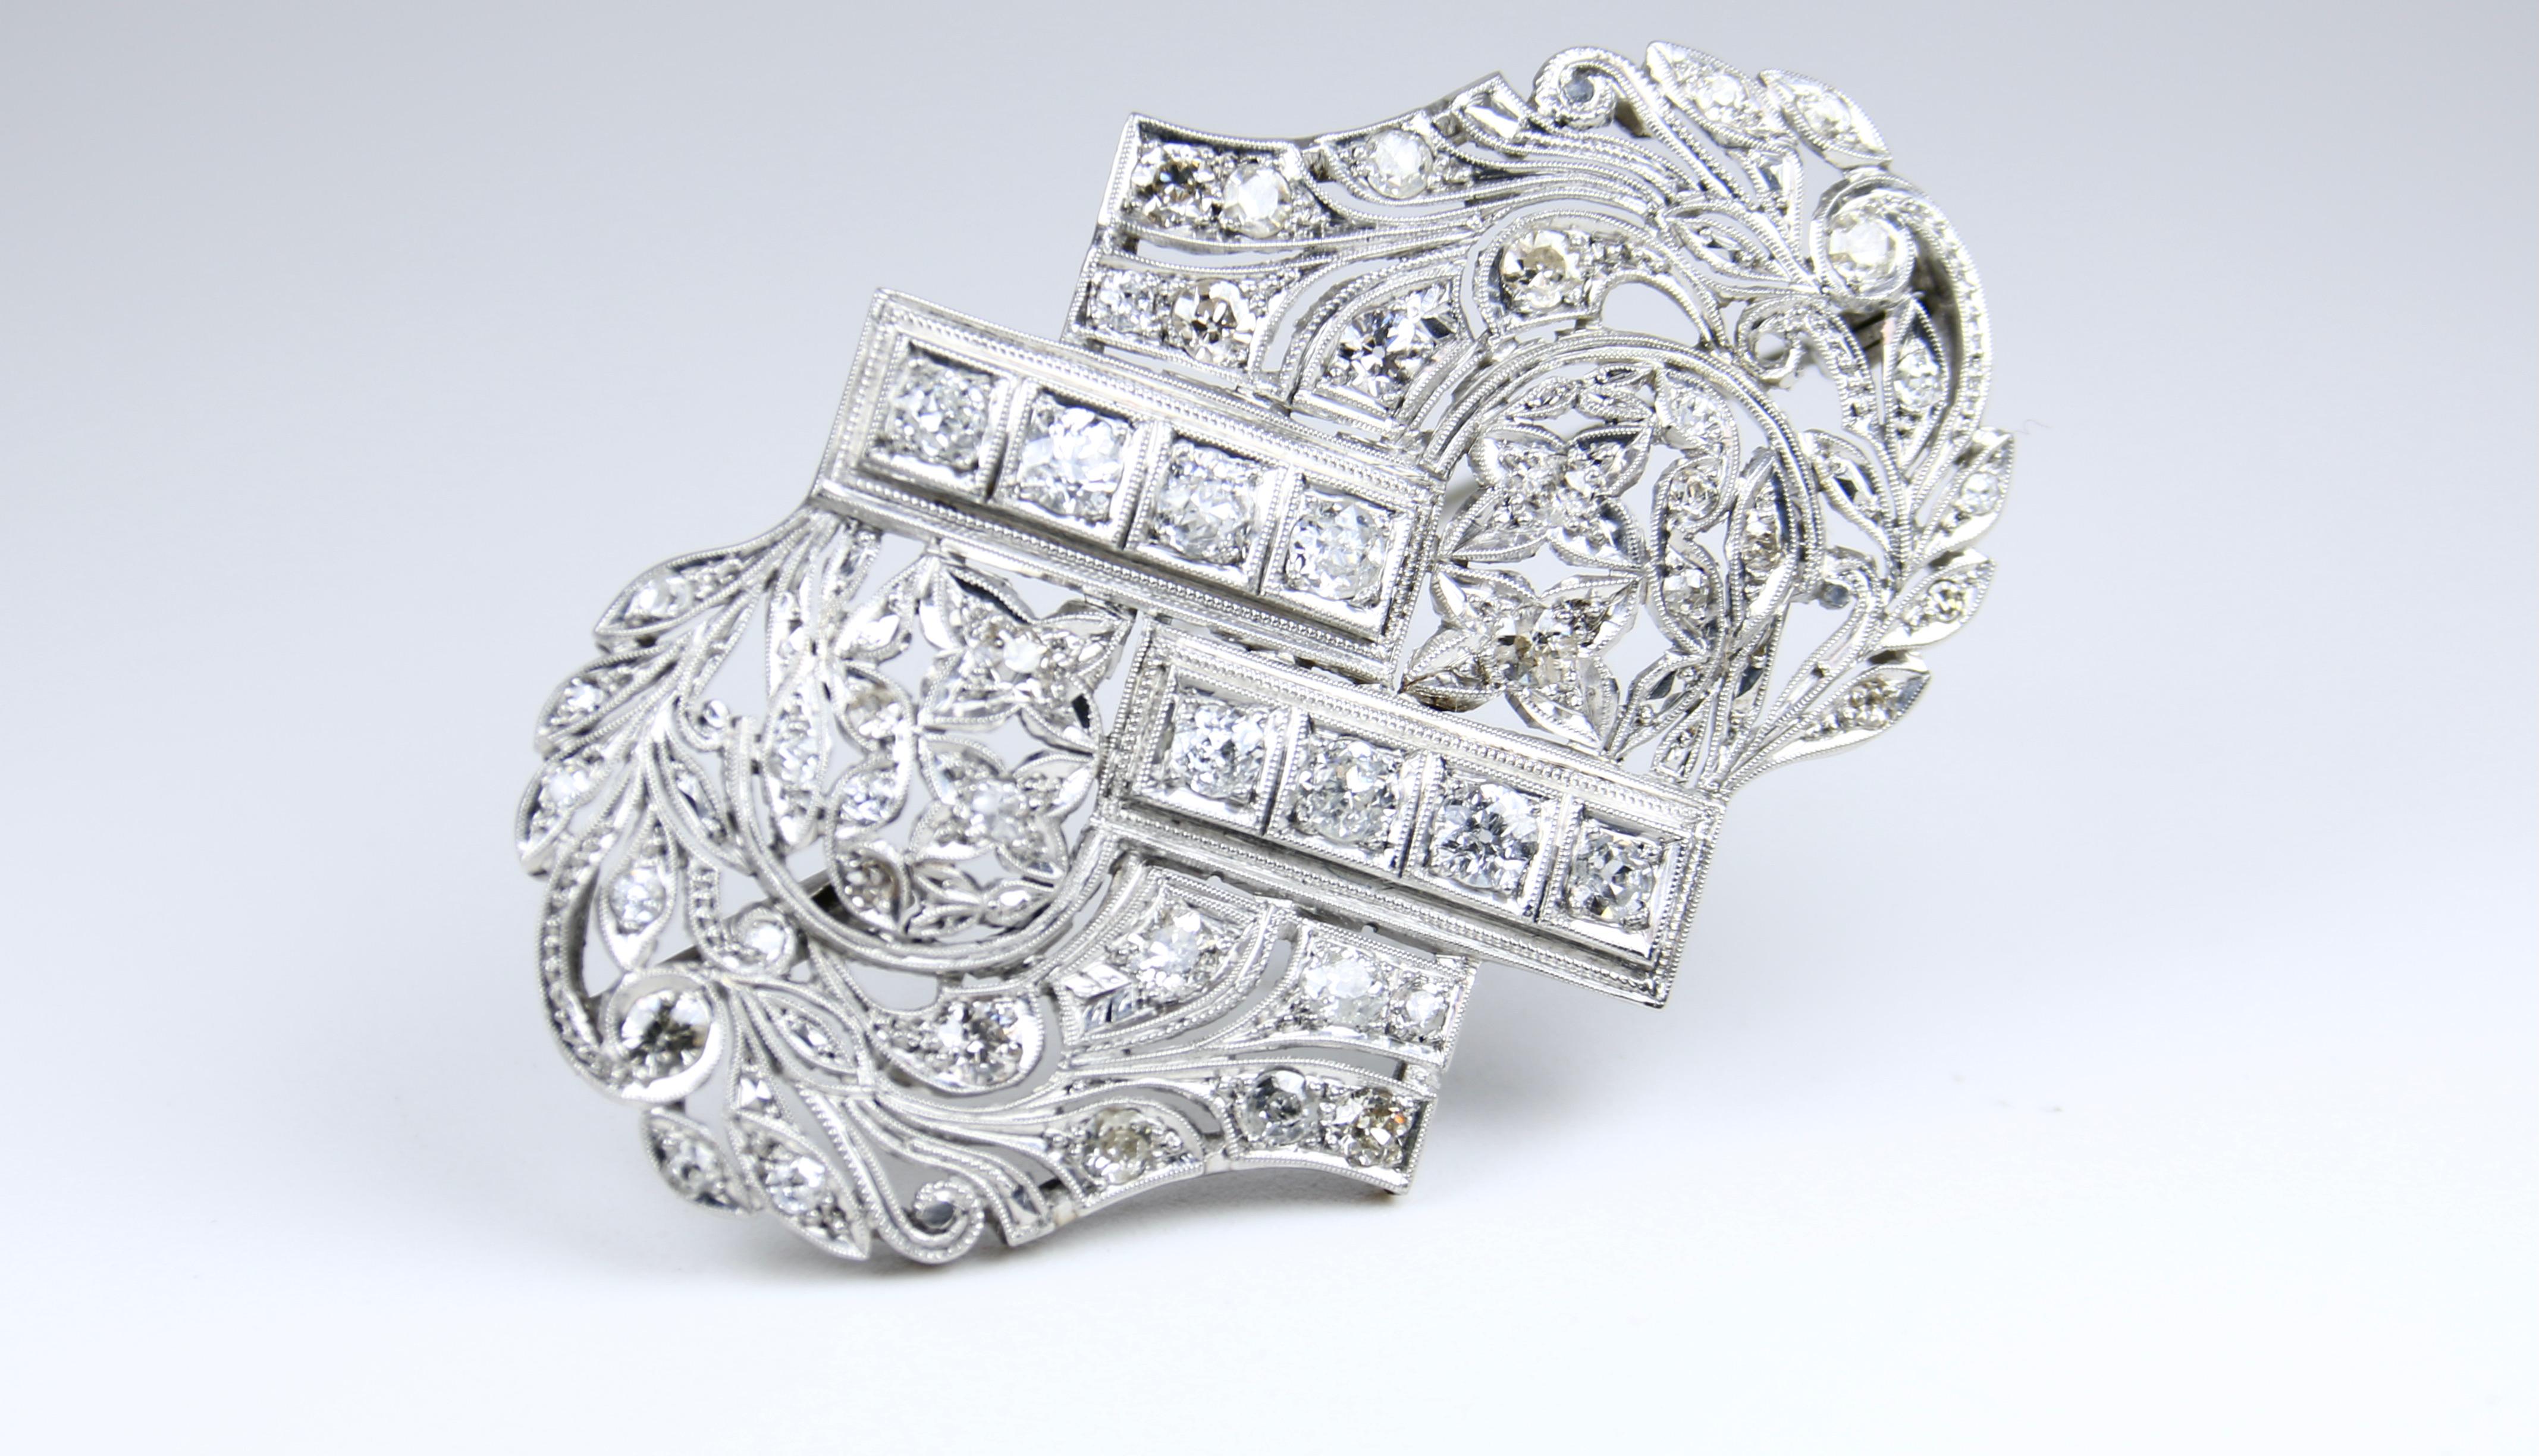 This beautiful diamond brooch is set in platinum and sure to make a stunning addition to any Diamond Ensemble.